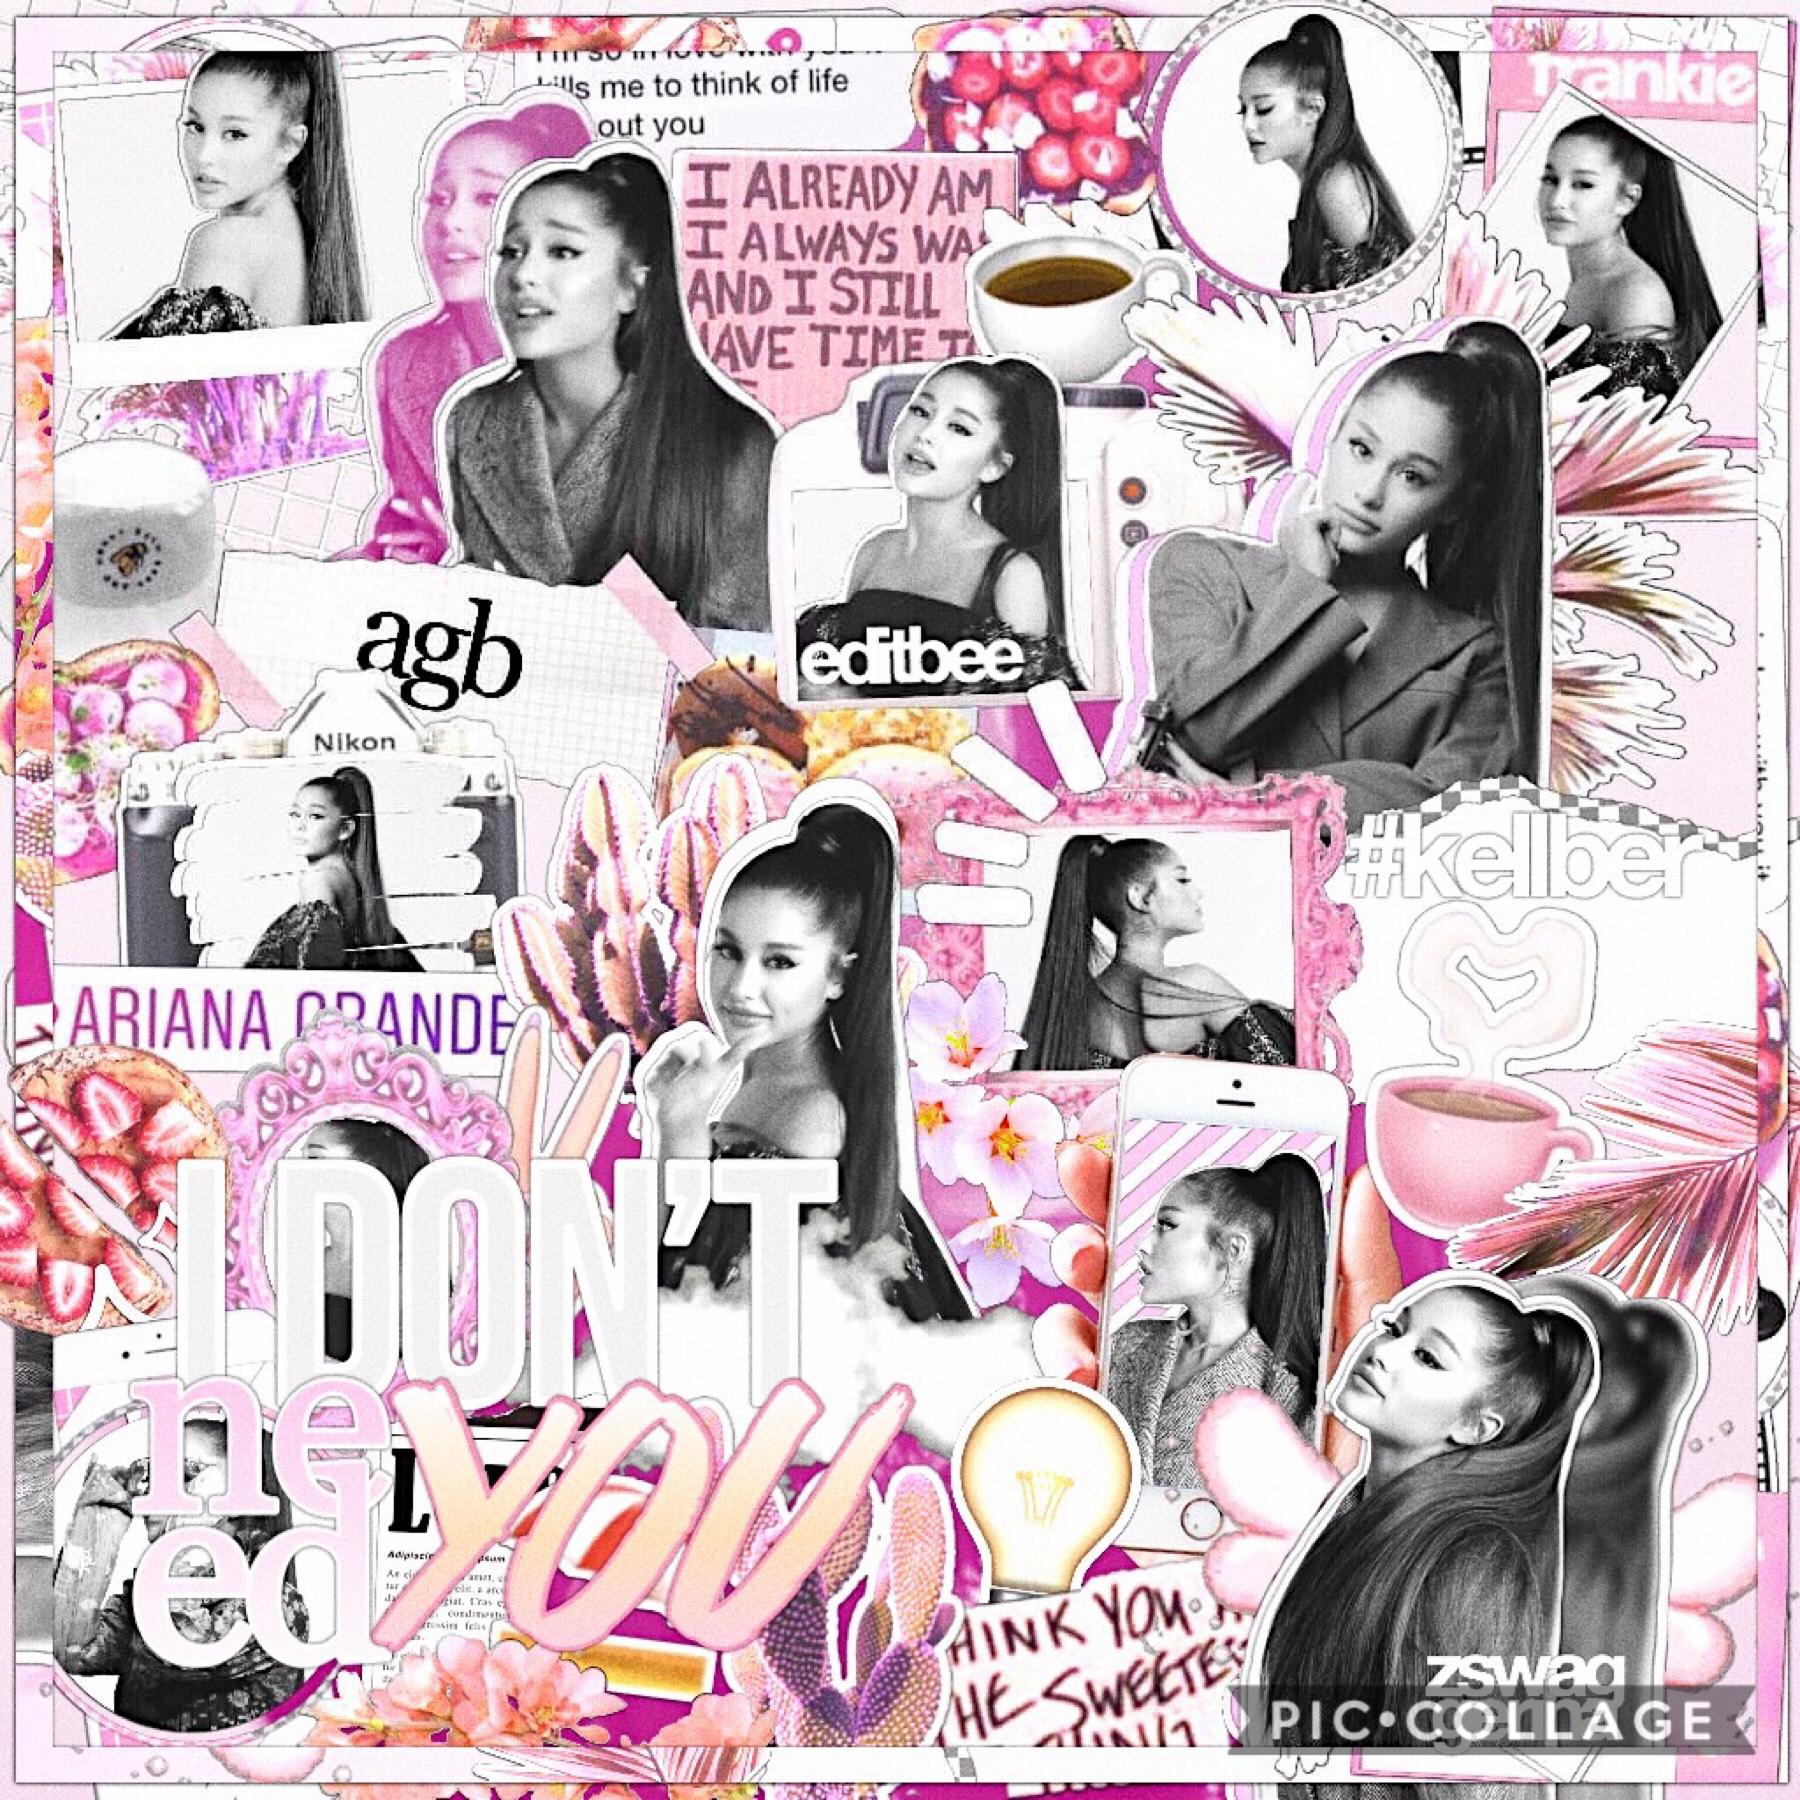 here we go again #kellber 💗🖤 this edit was such a challenge but I think it’s a win! kellbers not afraid 😂 go follow my beautiful and ridiculously talented bestie @editbee 👯‍♀️💭 